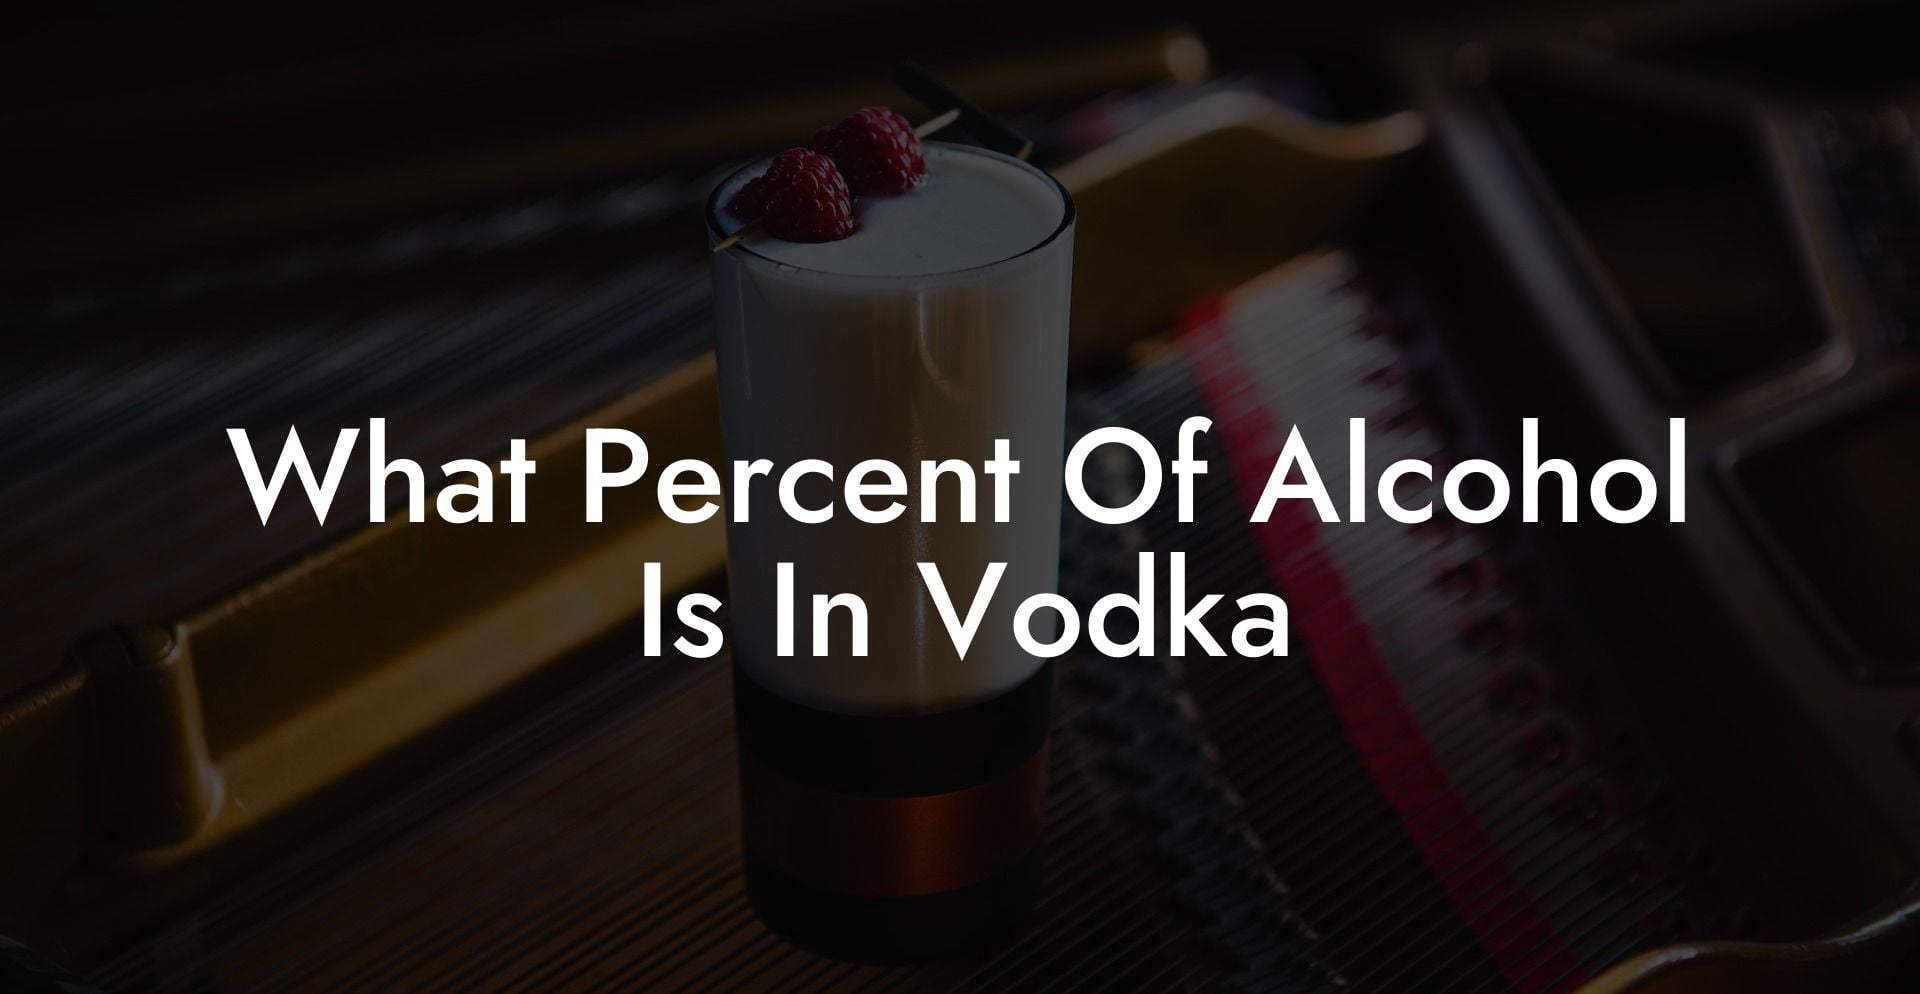 What Percent Of Alcohol Is In Vodka